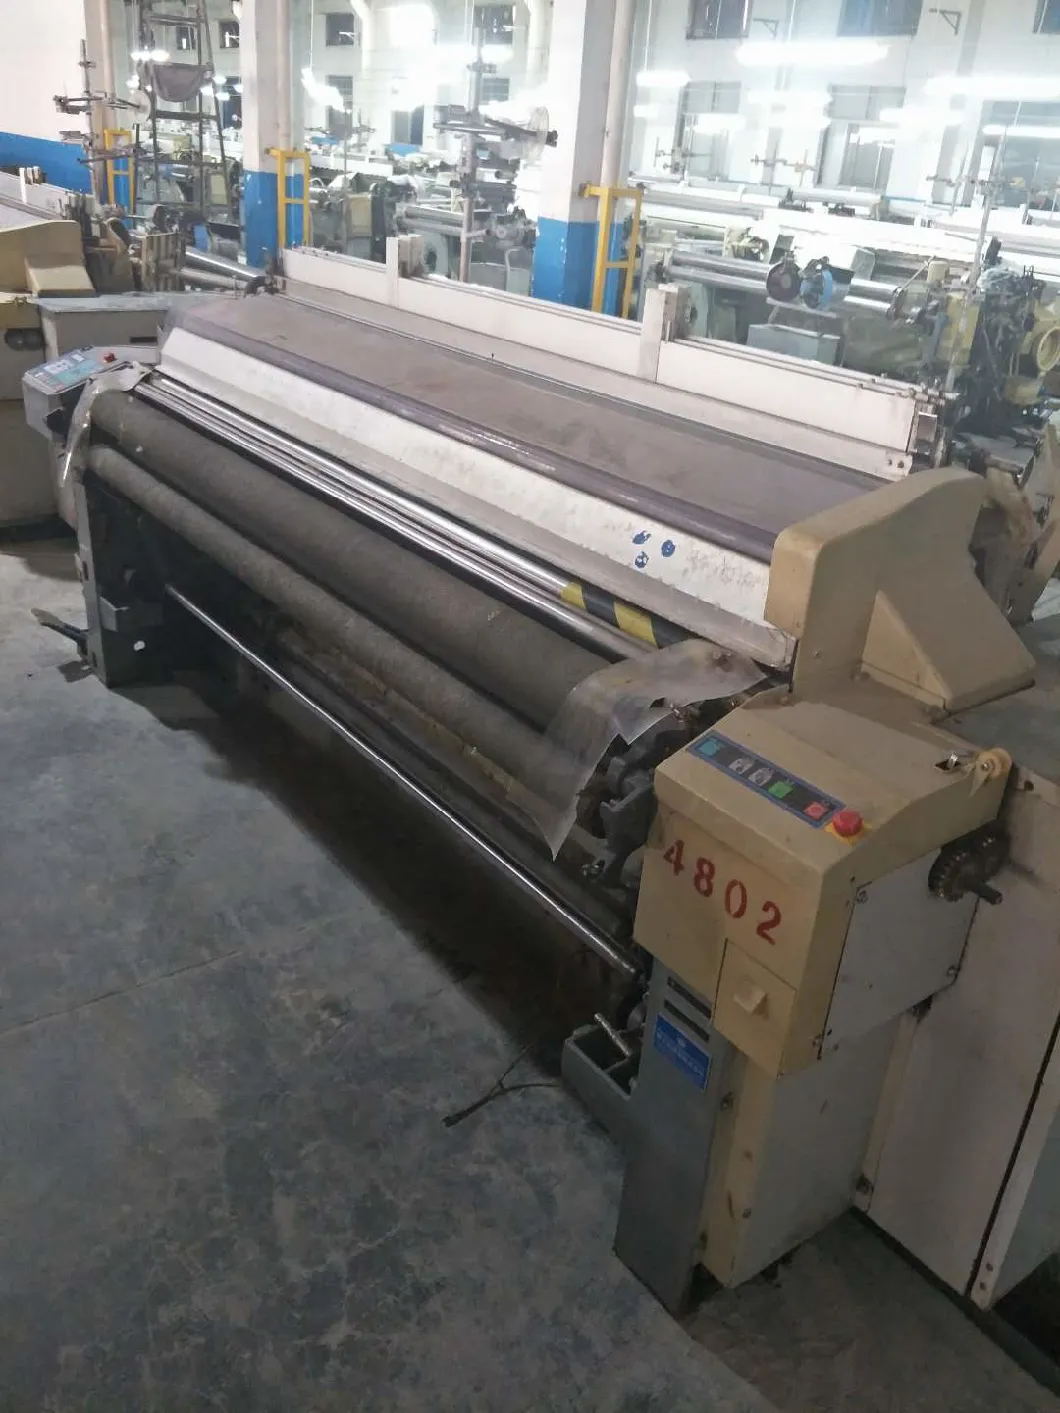 Toyota Lw2ED Waterjet Loom Year 2013 190cm with Crank Weaving Textile Machinery